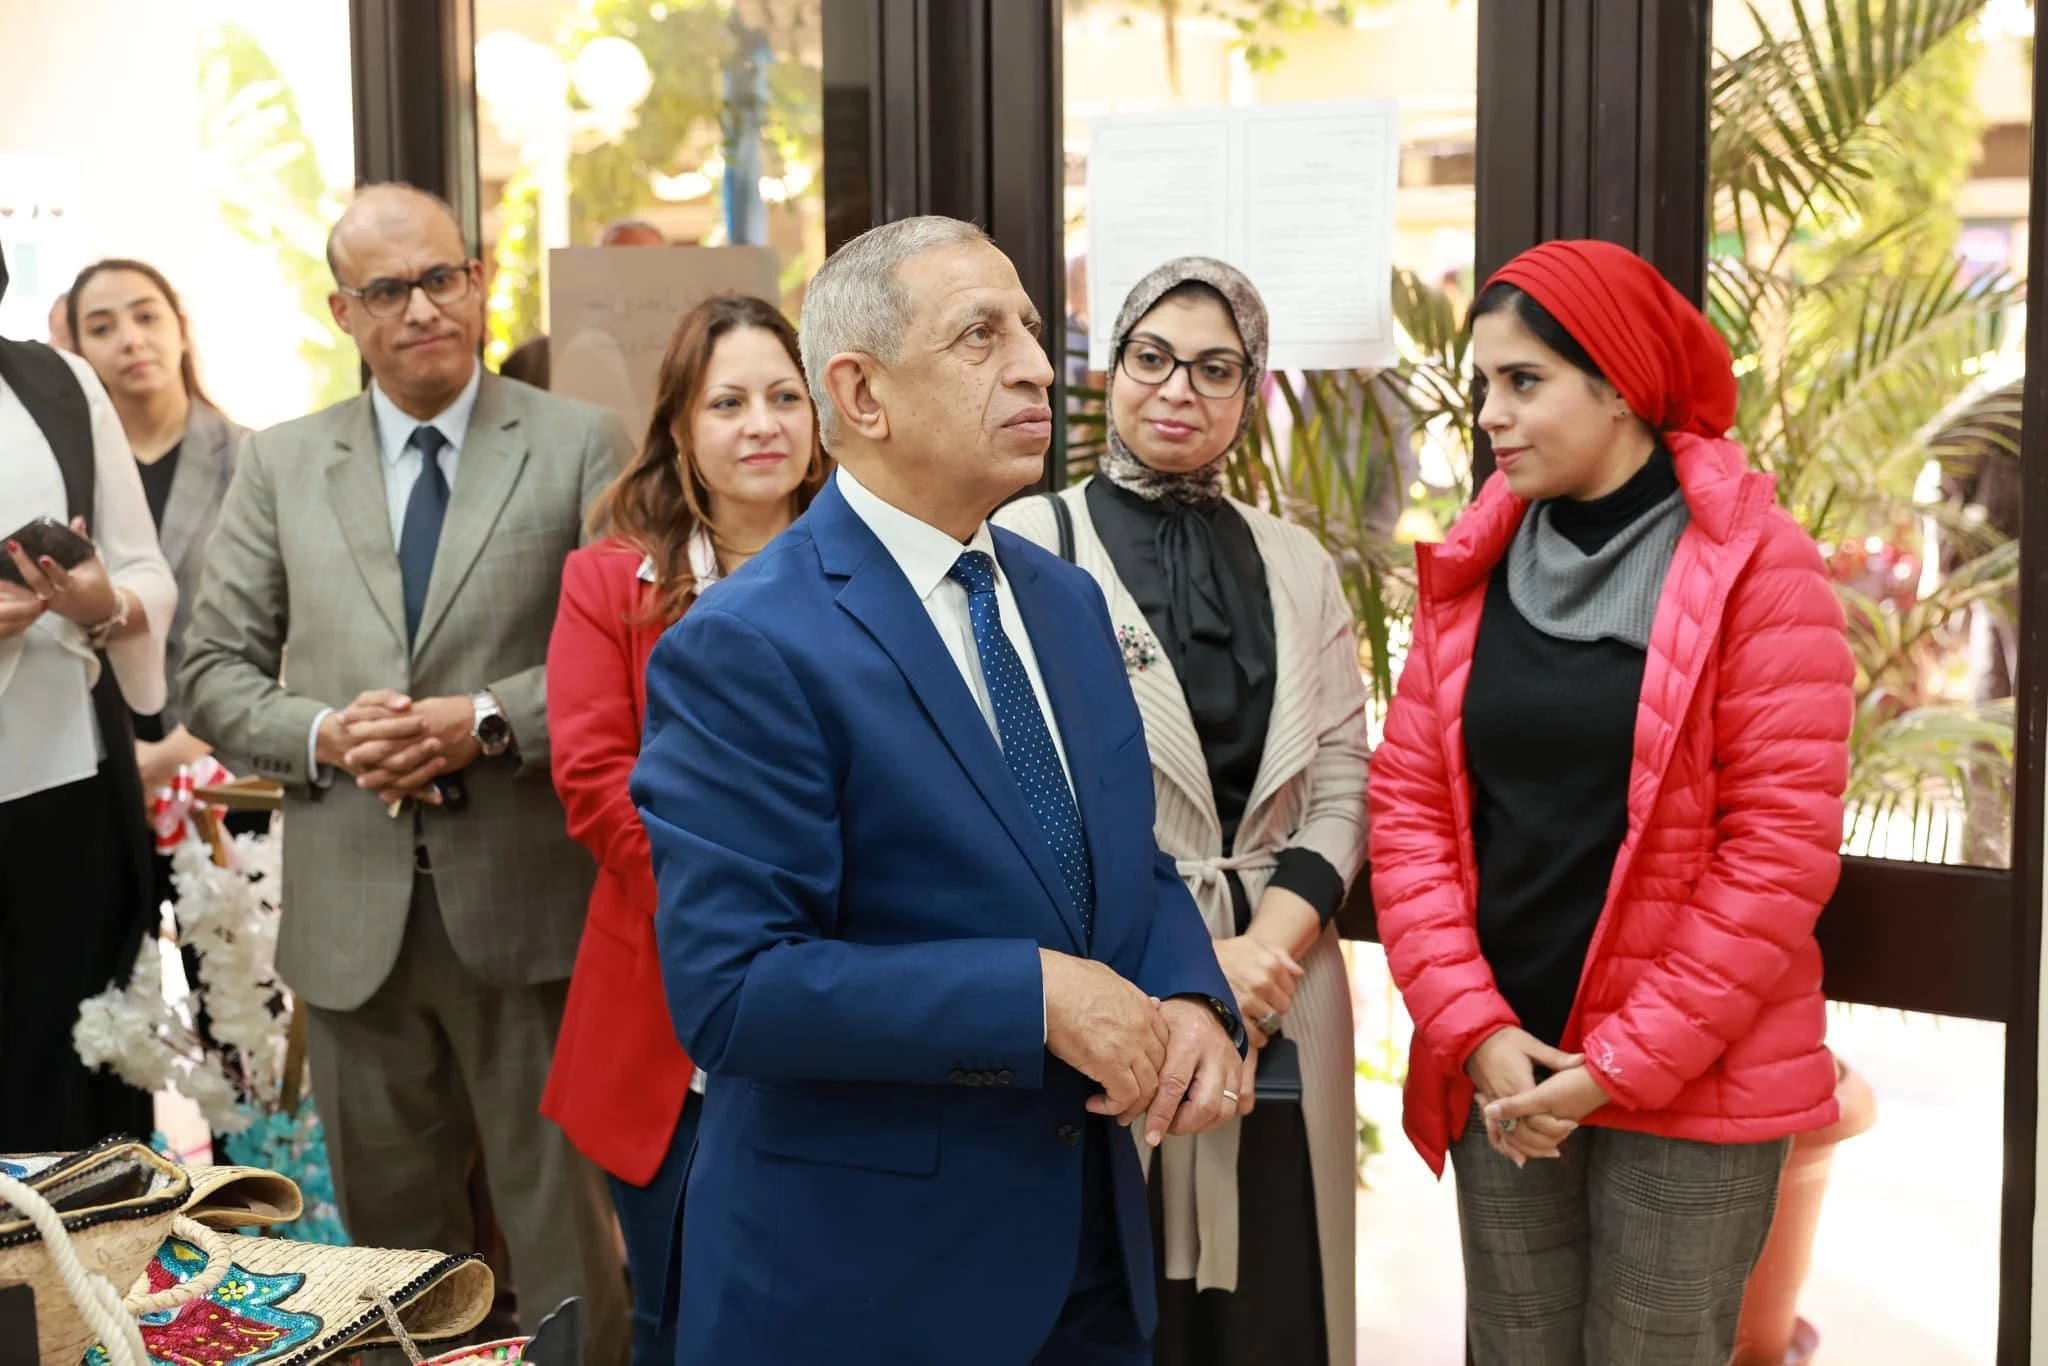 His Excellency Professor Dr., President of the Arab Academy for Science, Technology and Maritime Transport, opened the closing ceremony of activities and the exhibition of fine arts and handicrafts for students of the Faculties of Management, Technology, Language and Media in Miami on: 1/4/20249